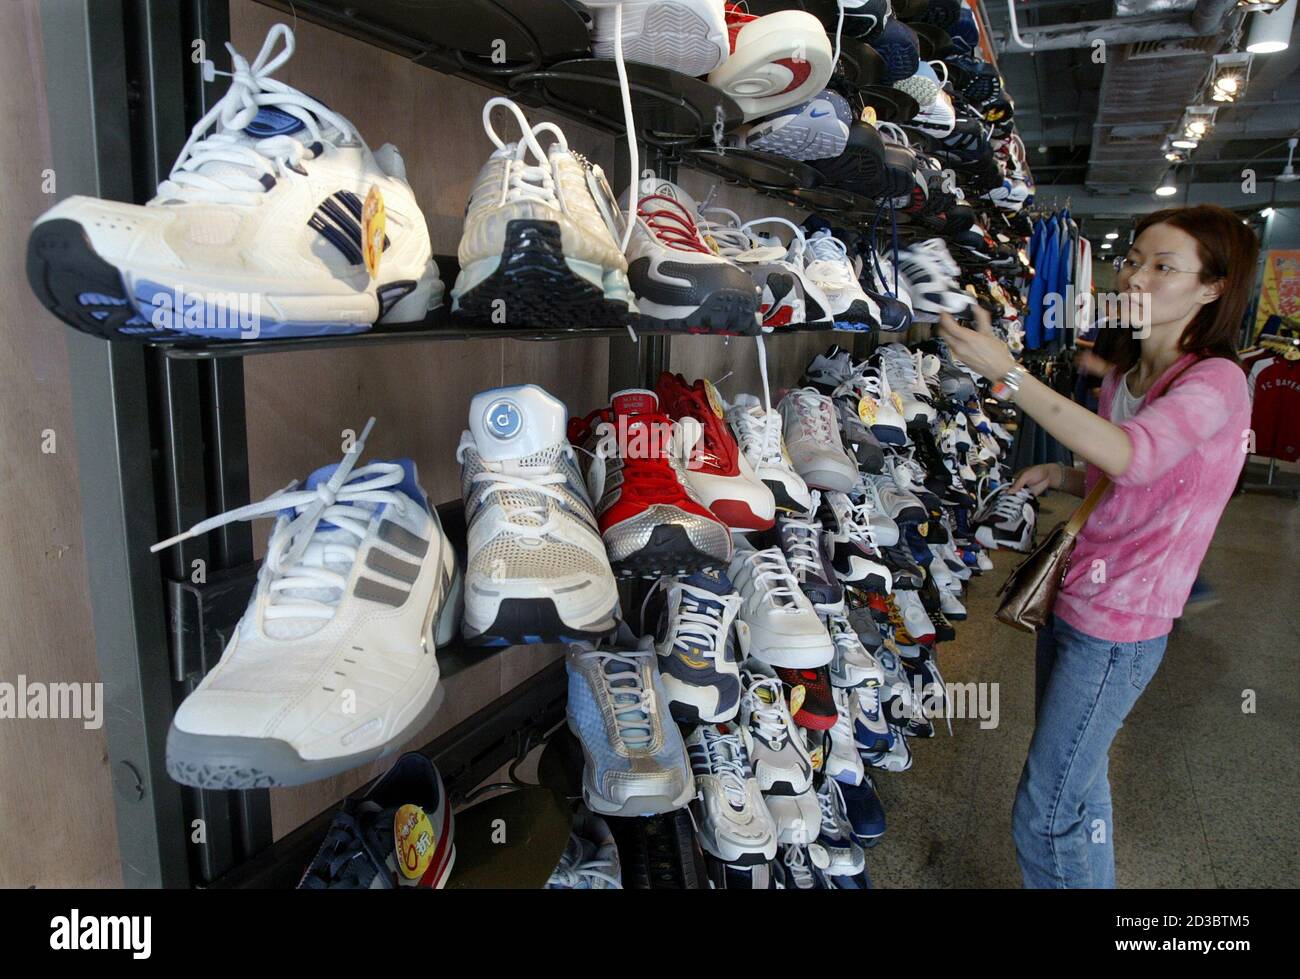 defect leef ermee grafisch A shopper picks up a China-made athletic shoe at a department store in  China's southern city of Shenzhen April 22, 2004. Southern China is home to  thousands of hangar-like factories, where millions